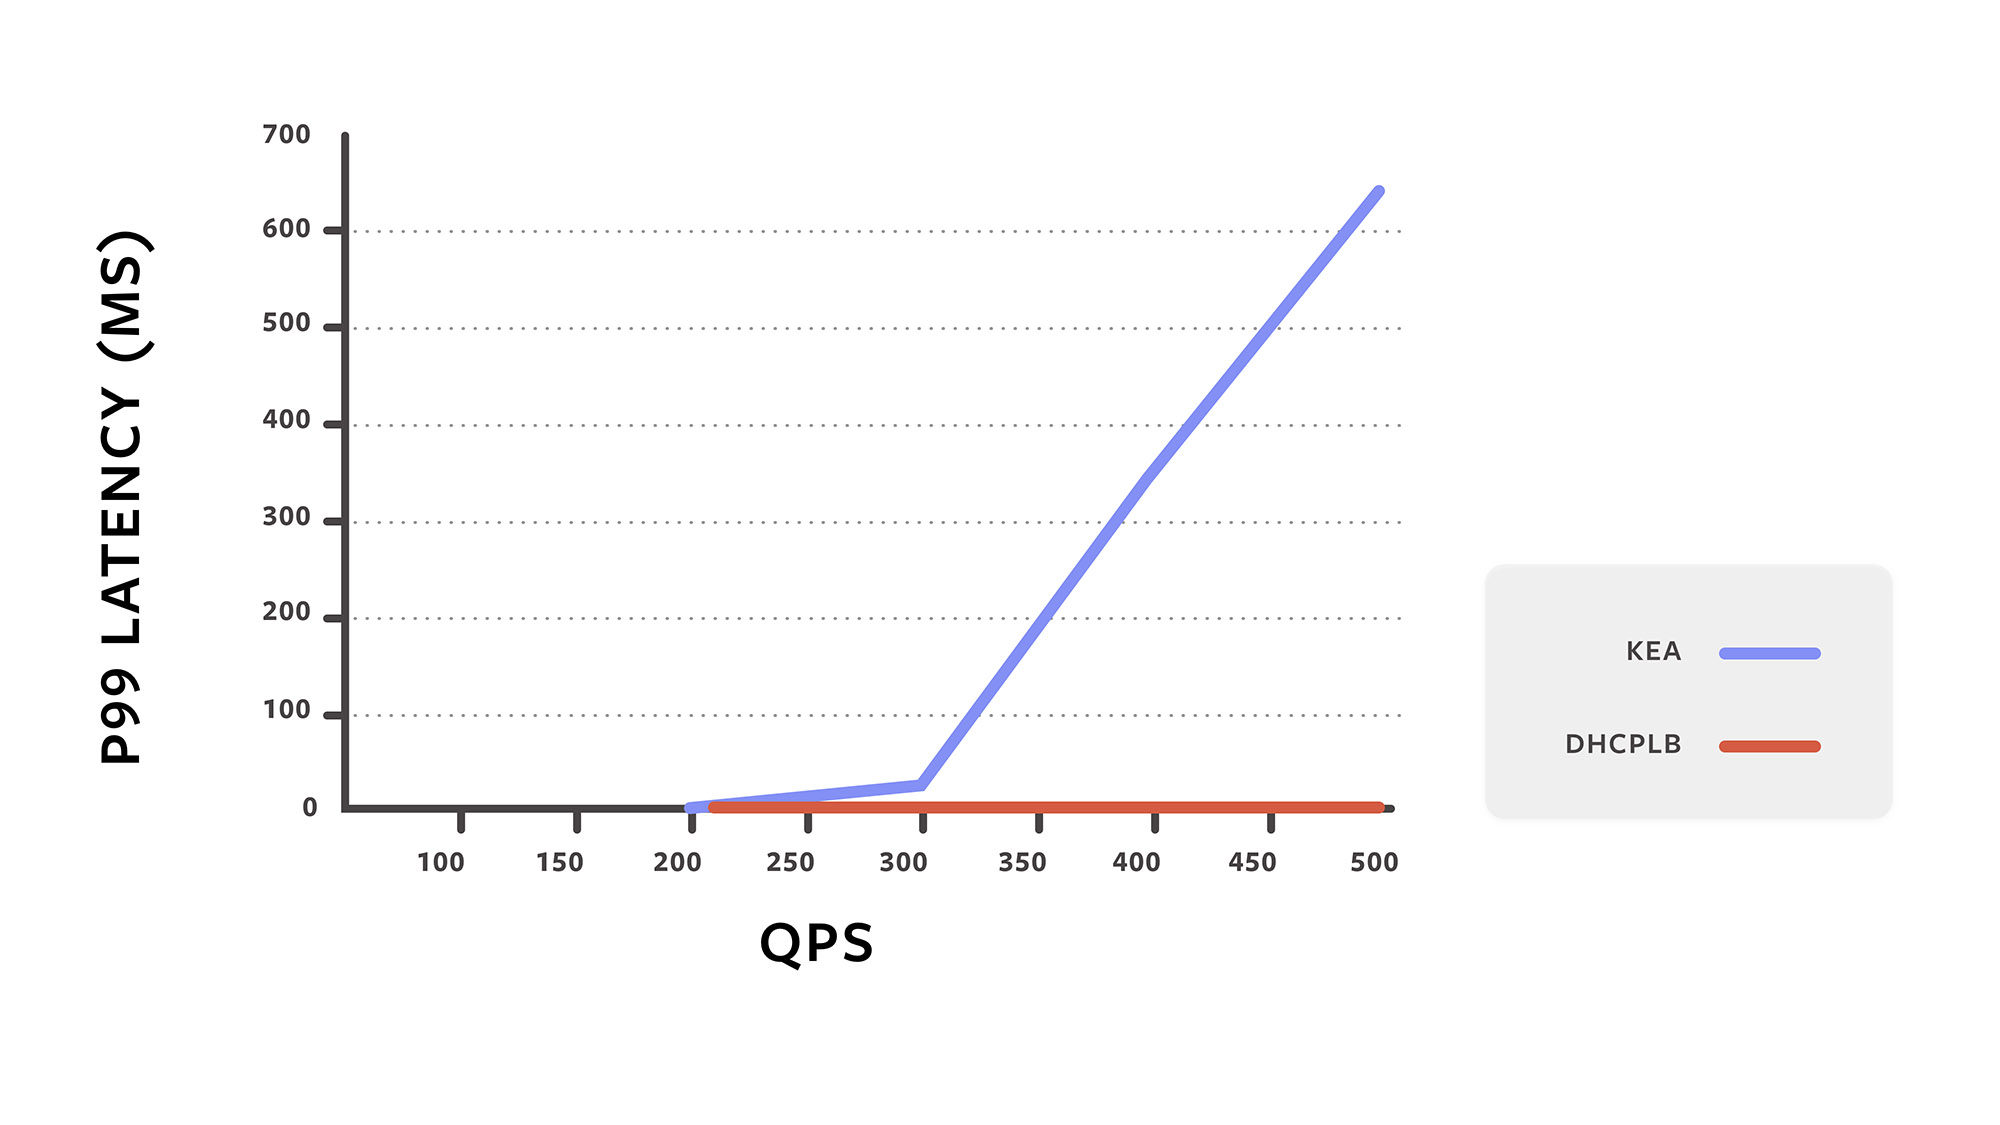 For Kea, latency increases as QPS increases, until it starts timing out and dropping requests. For DHCPLB, it stays constant.